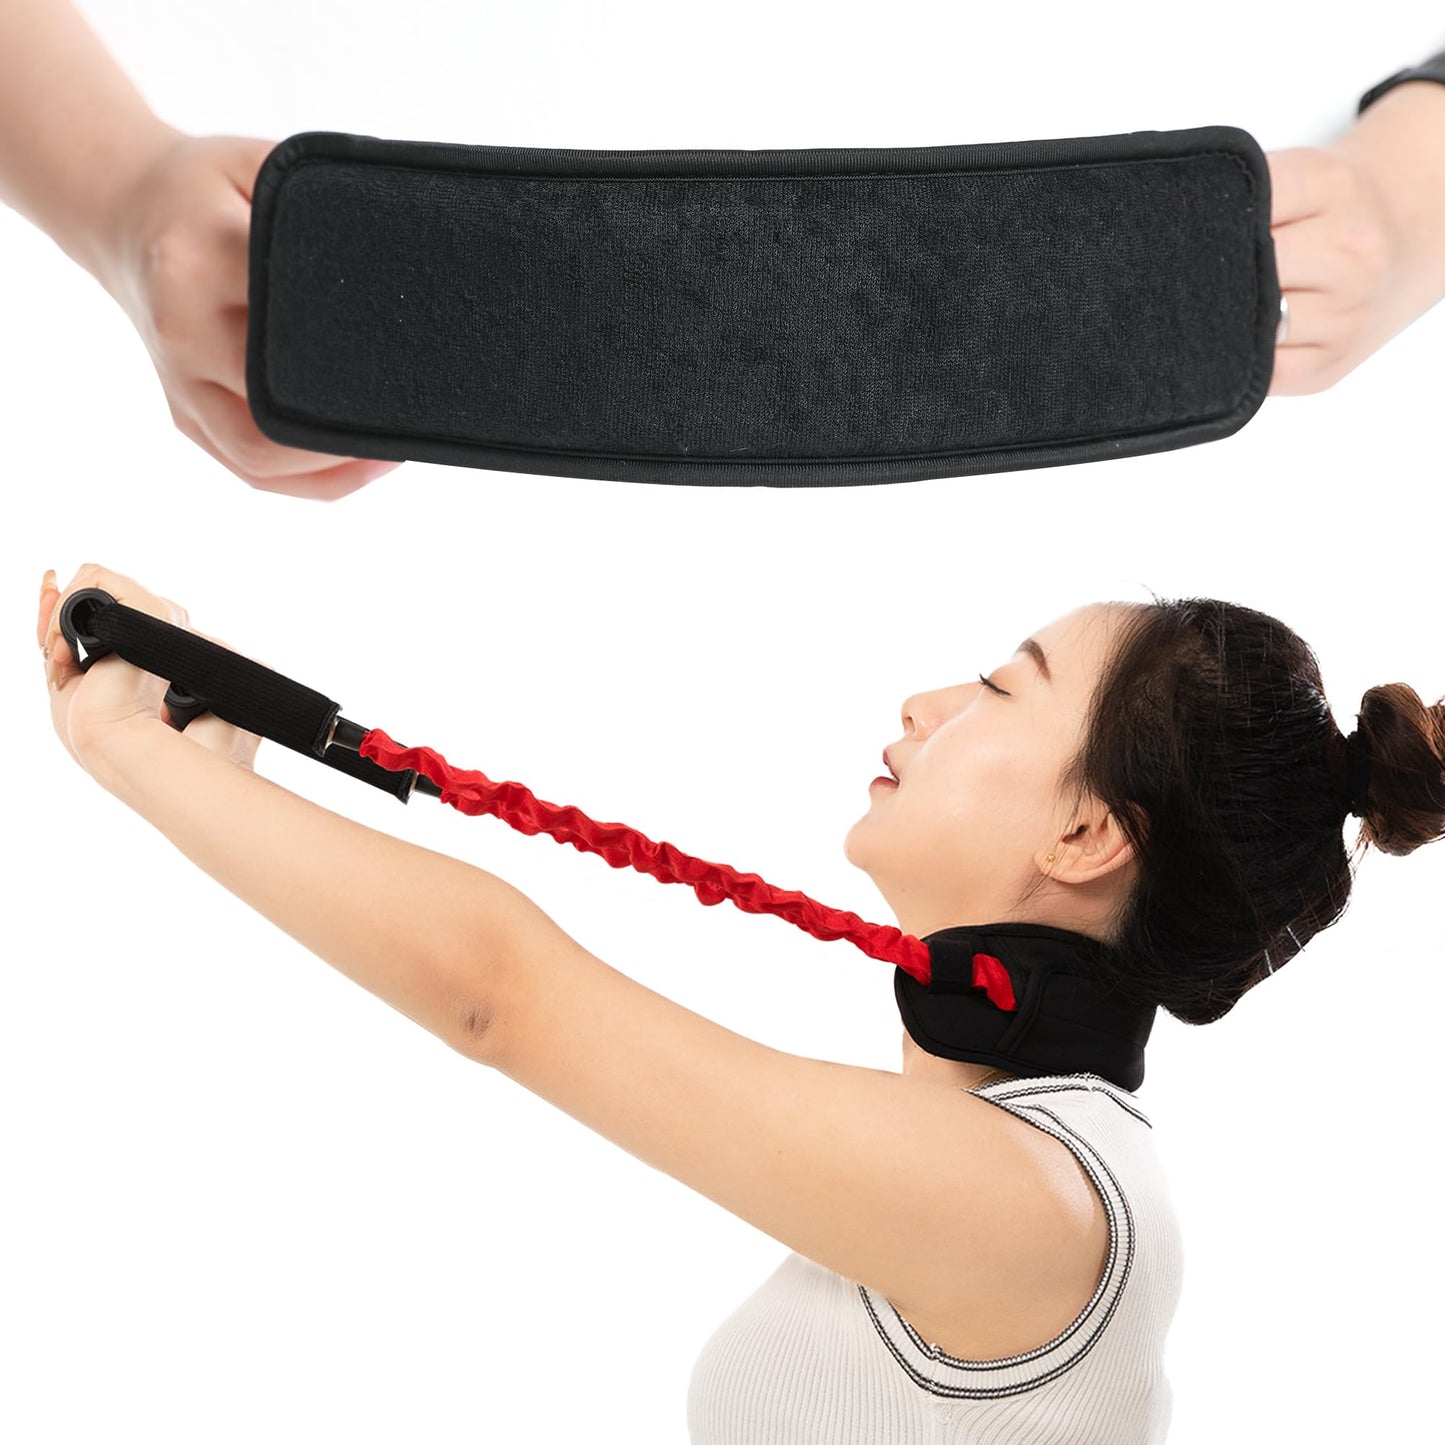 Neck Stretcher Exerciser - Cervical Traction Device for Neck Pain Relief, Neck Strengthener with Thicker Pad and Red Handle - Portable and Comfortable (30-40lb)